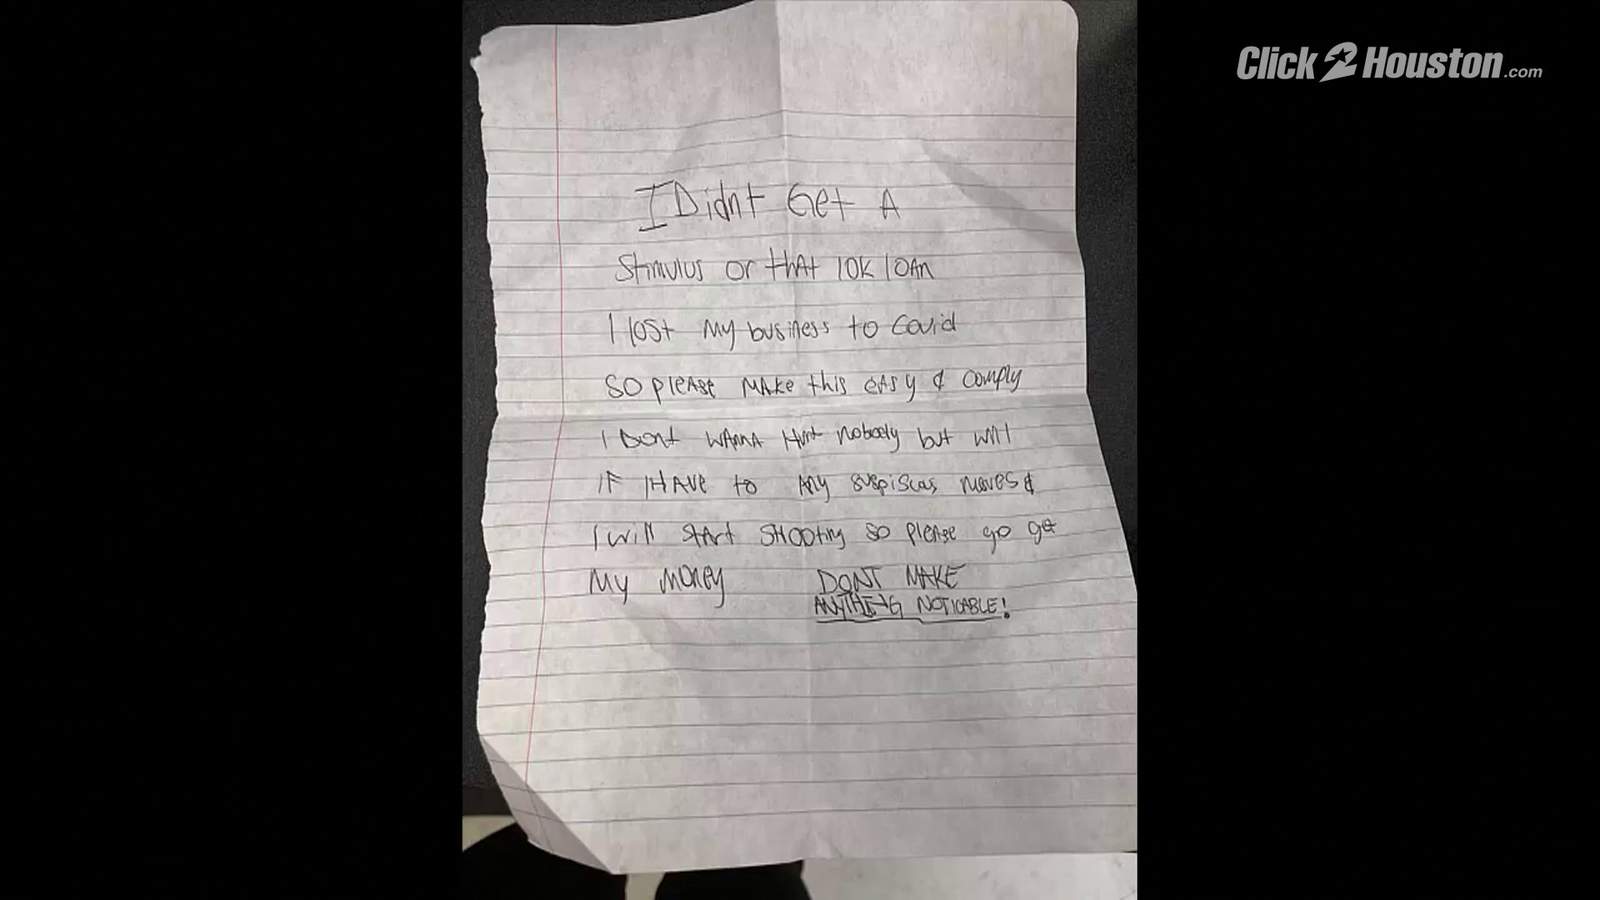 Dont wanna hurt nobody: Man wanted in connection with bank robbery gives teller note blaming COVID-19 for crime